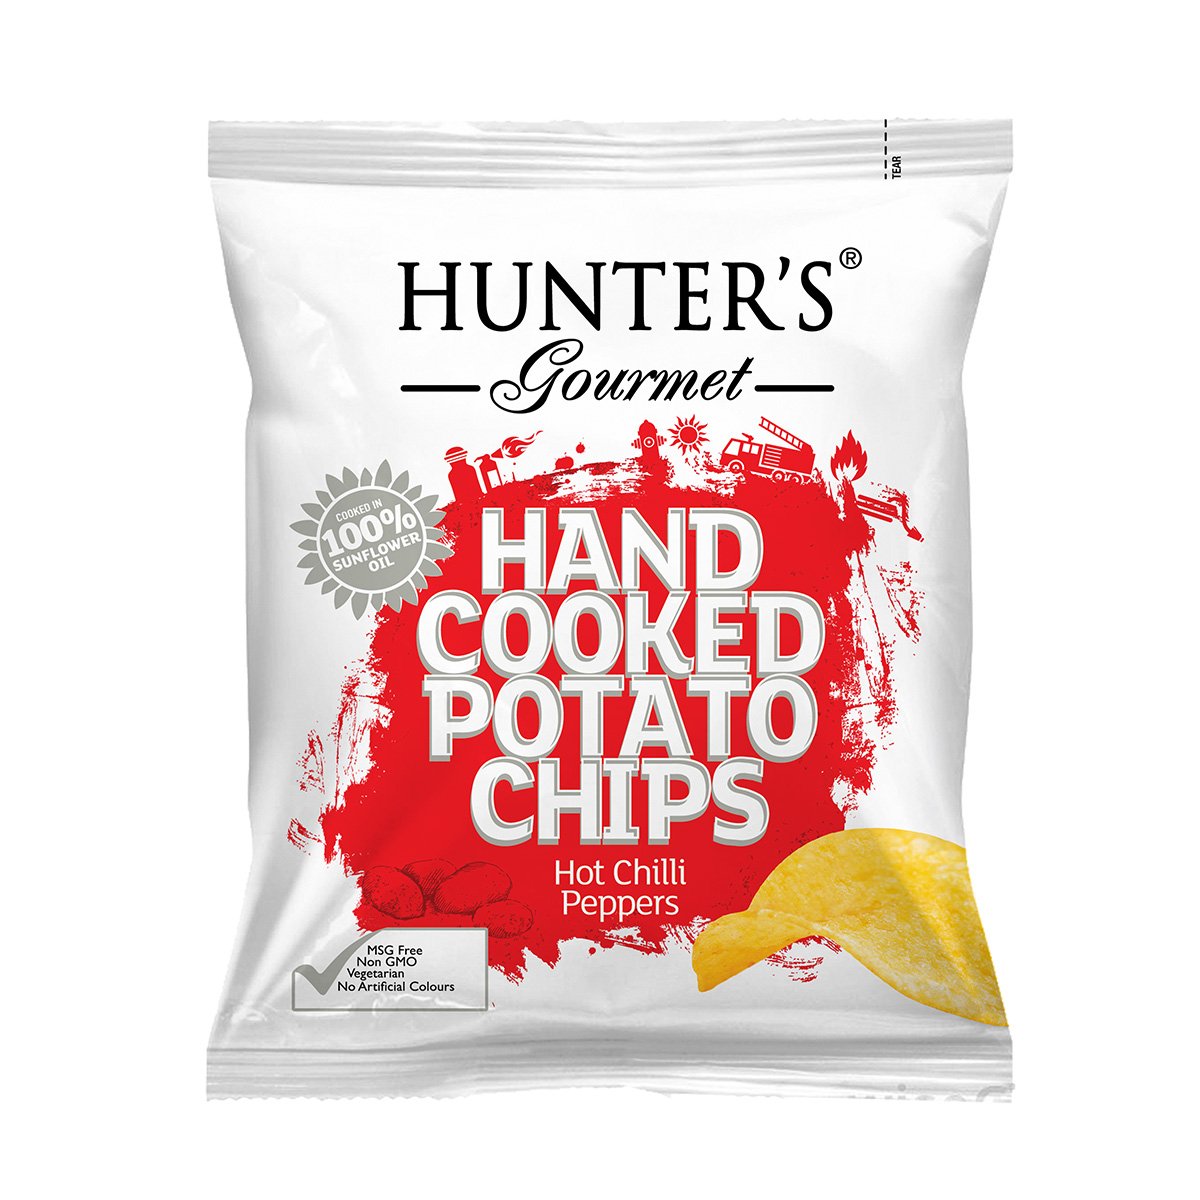 HUNTER'S GOURMET Hand Cooked Potato Chips Hot Chilli Peppers, 40g